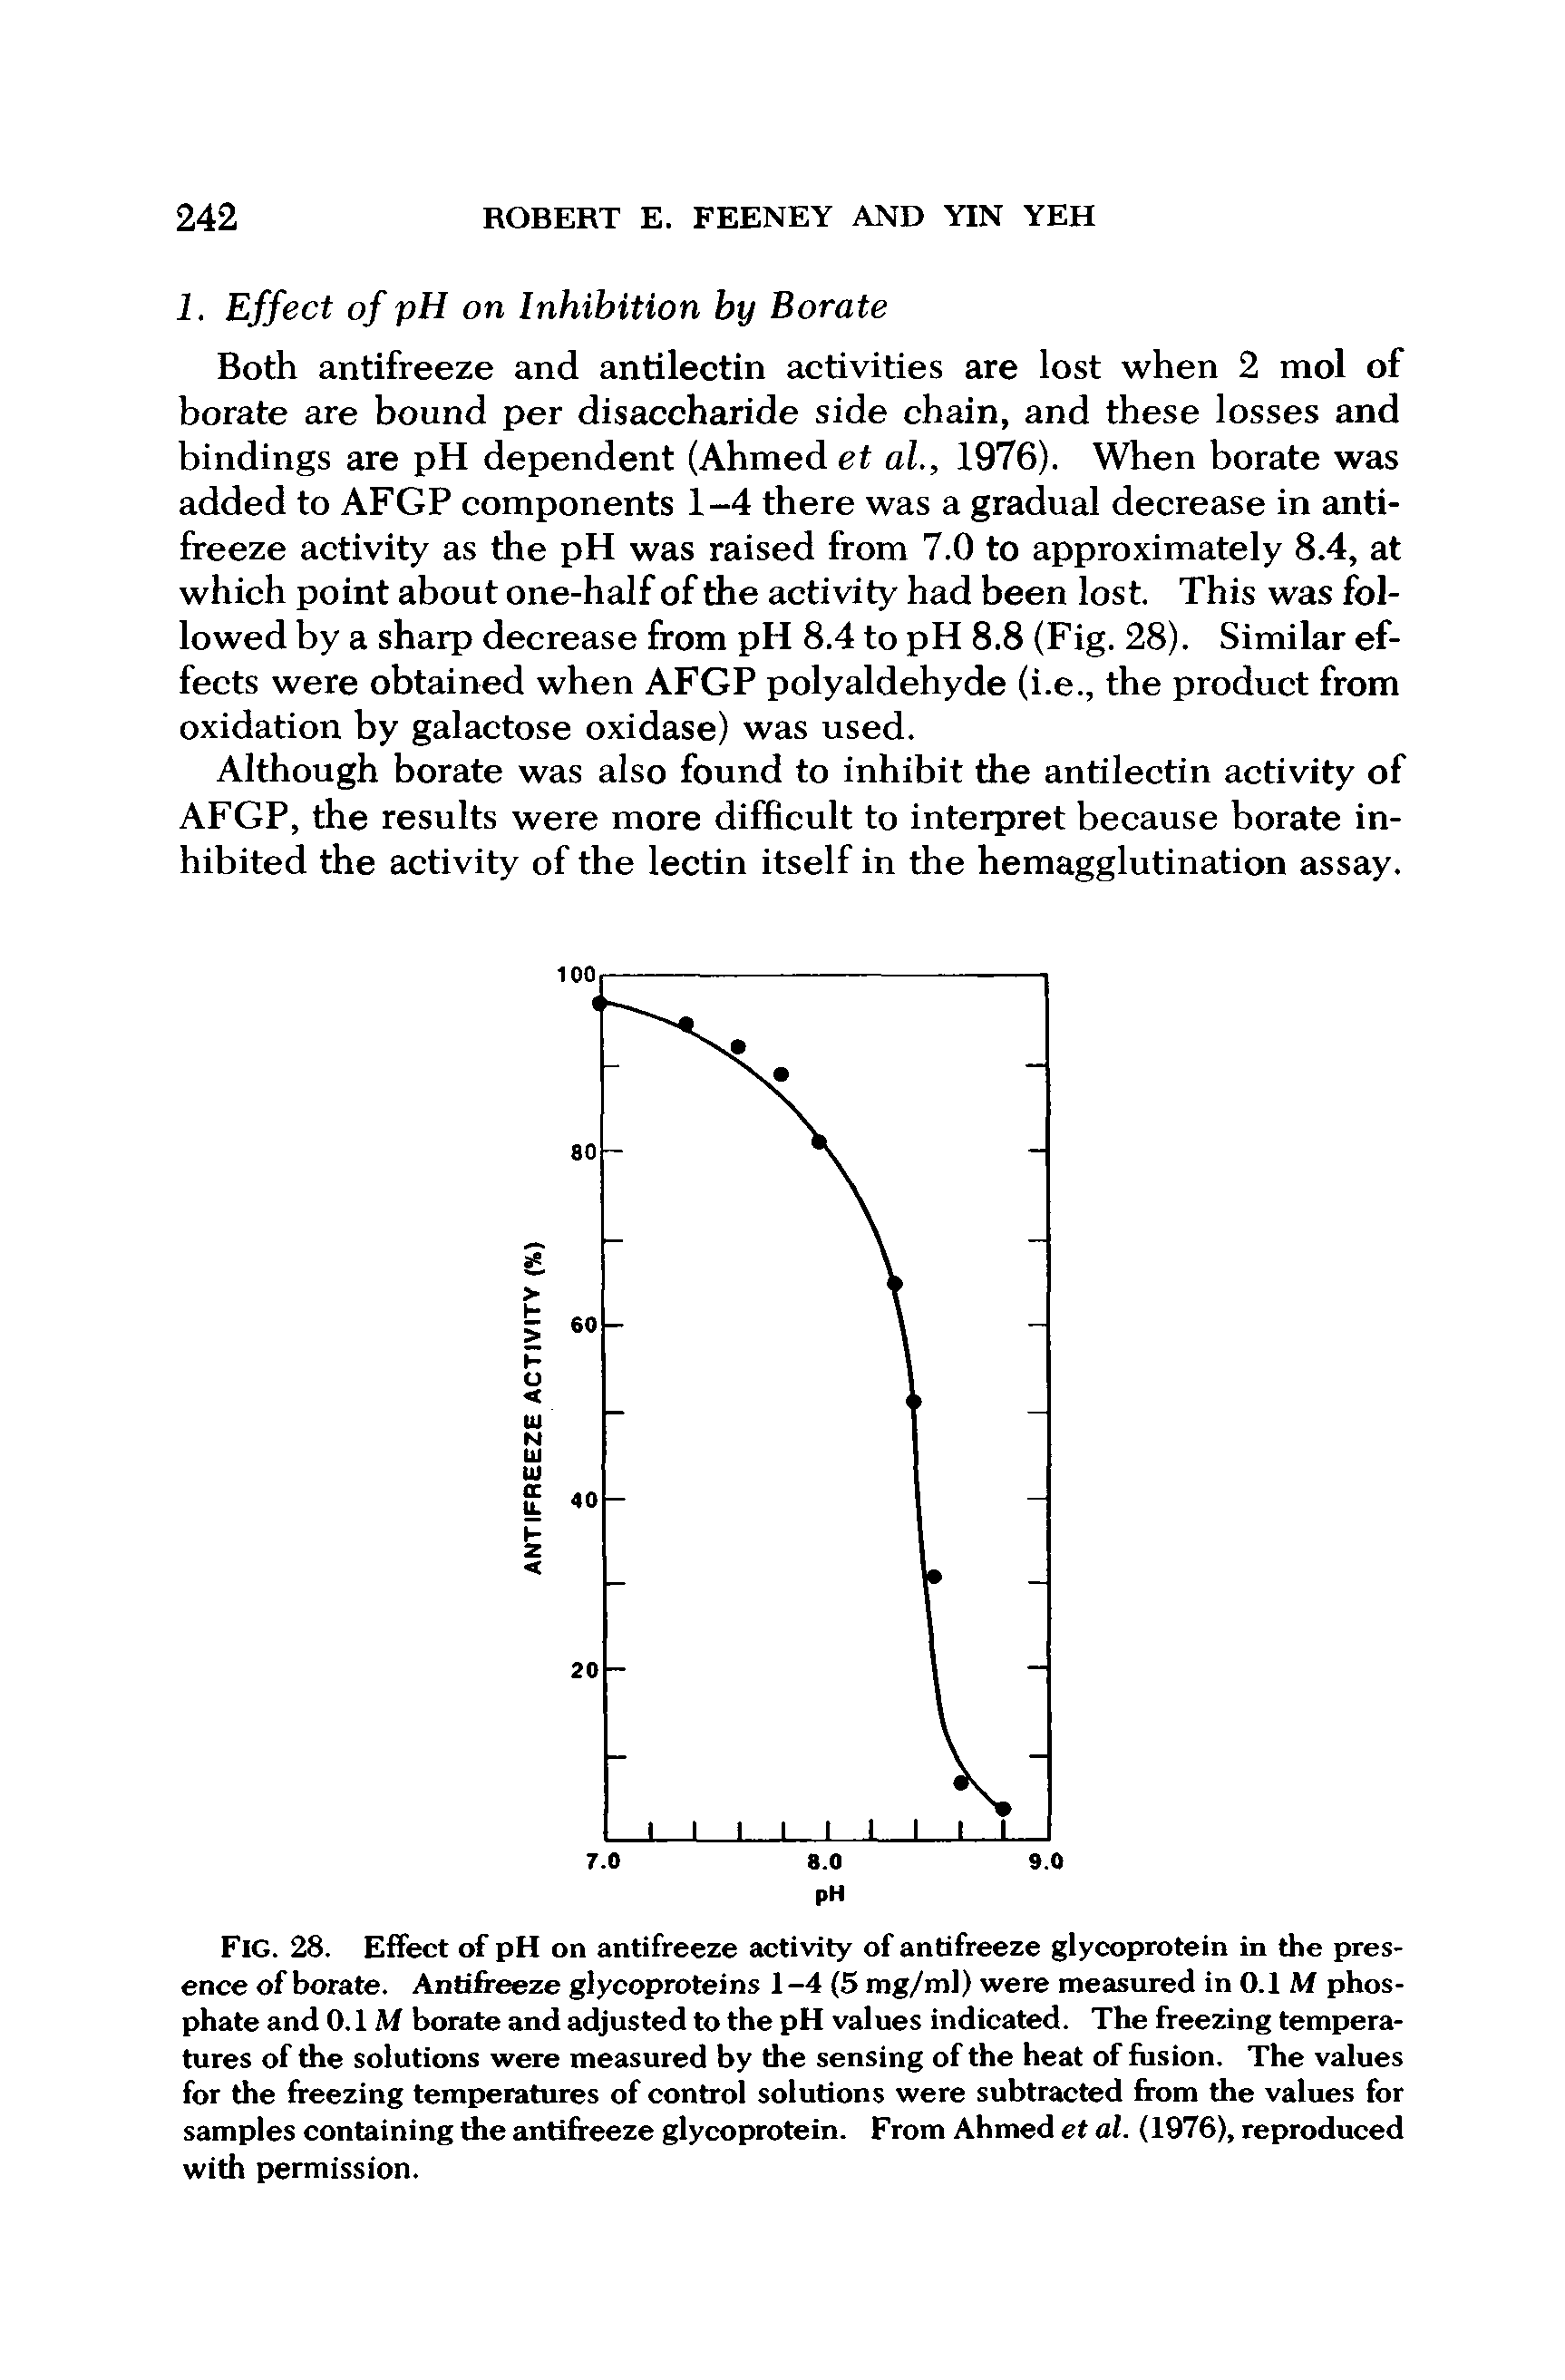 Fig. 28. Effect of pH on antifreeze activity of antifreeze glycoprotein in the presence of borate. Antifreeze glycoproteins 1-4 (5 mg/ml) were measured in 0.1 M phosphate and 0.1 M borate and adjusted to the pH values indicated. The freezing temperatures of the solutions were measured by the sensing of the heat of fusion. The values for the freezing temperatures of control solutions were subtracted from the values for samples containing the antifreeze glycoprotein. From Ahmed et al. (1976), reproduced with permission.